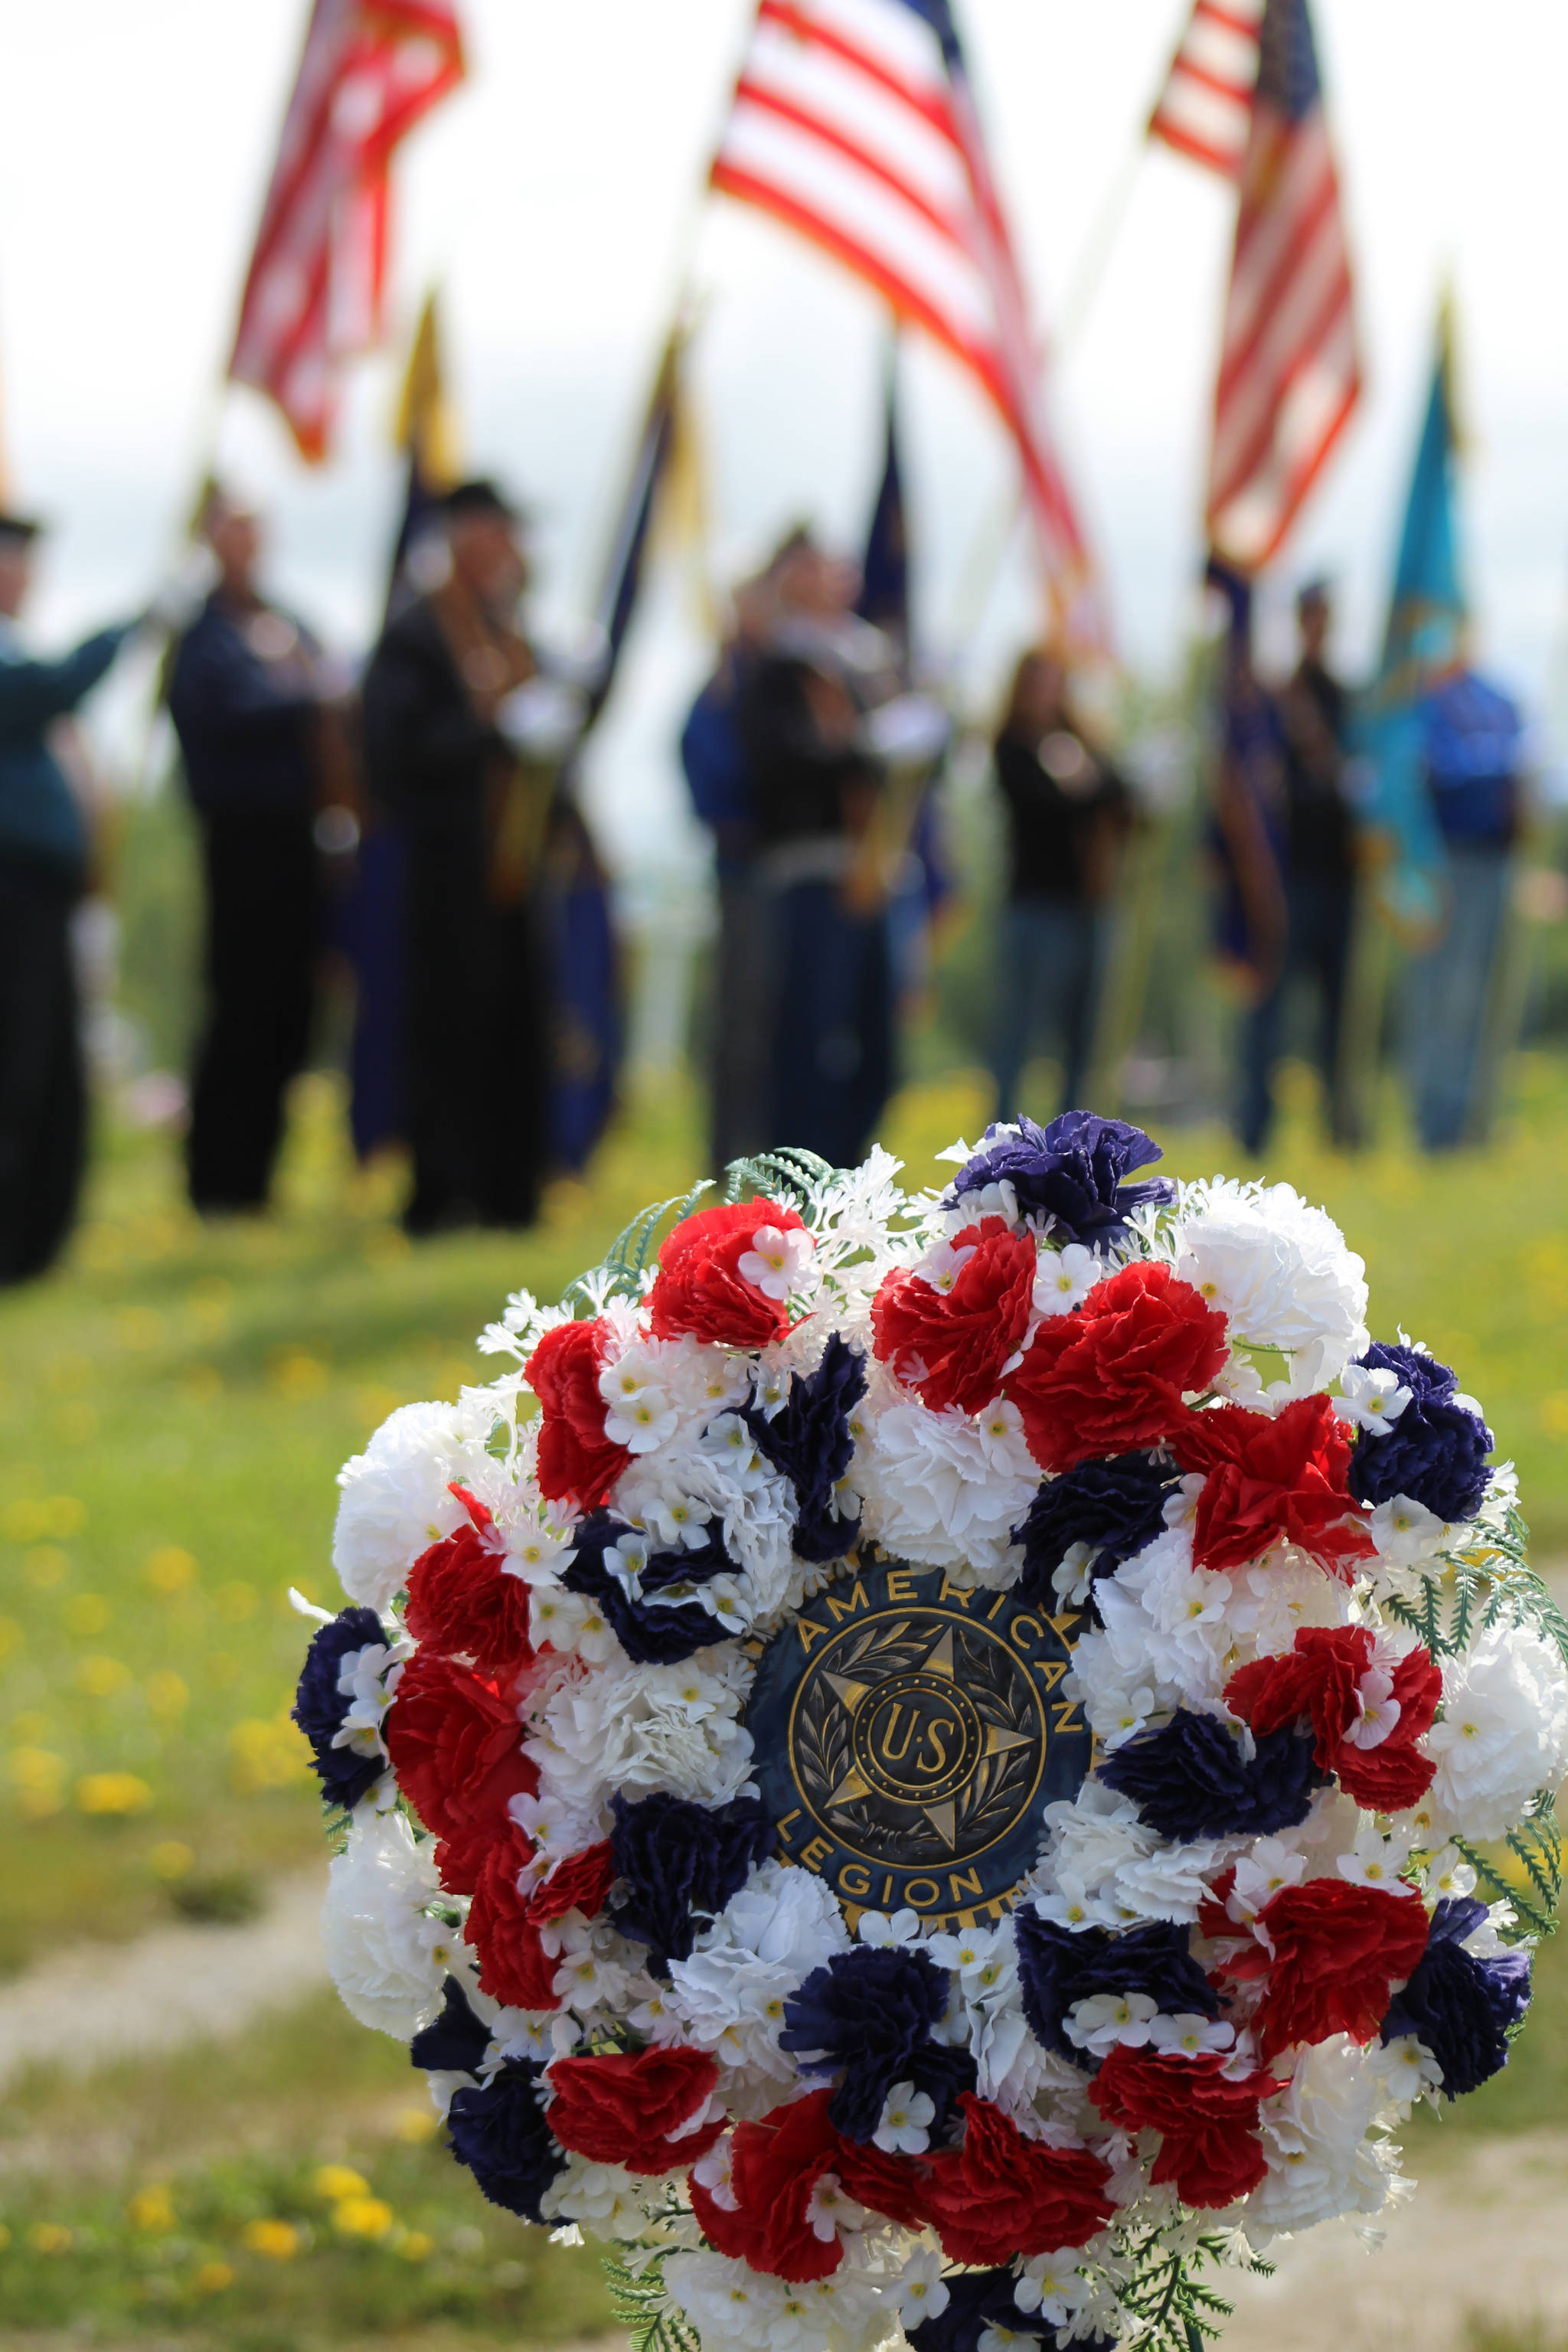 An American Legion flower wreath decorated the Ninilchik Cemetery at a 2106 Memorial Day service to honor those fallen in battle. (Homer News file photo)